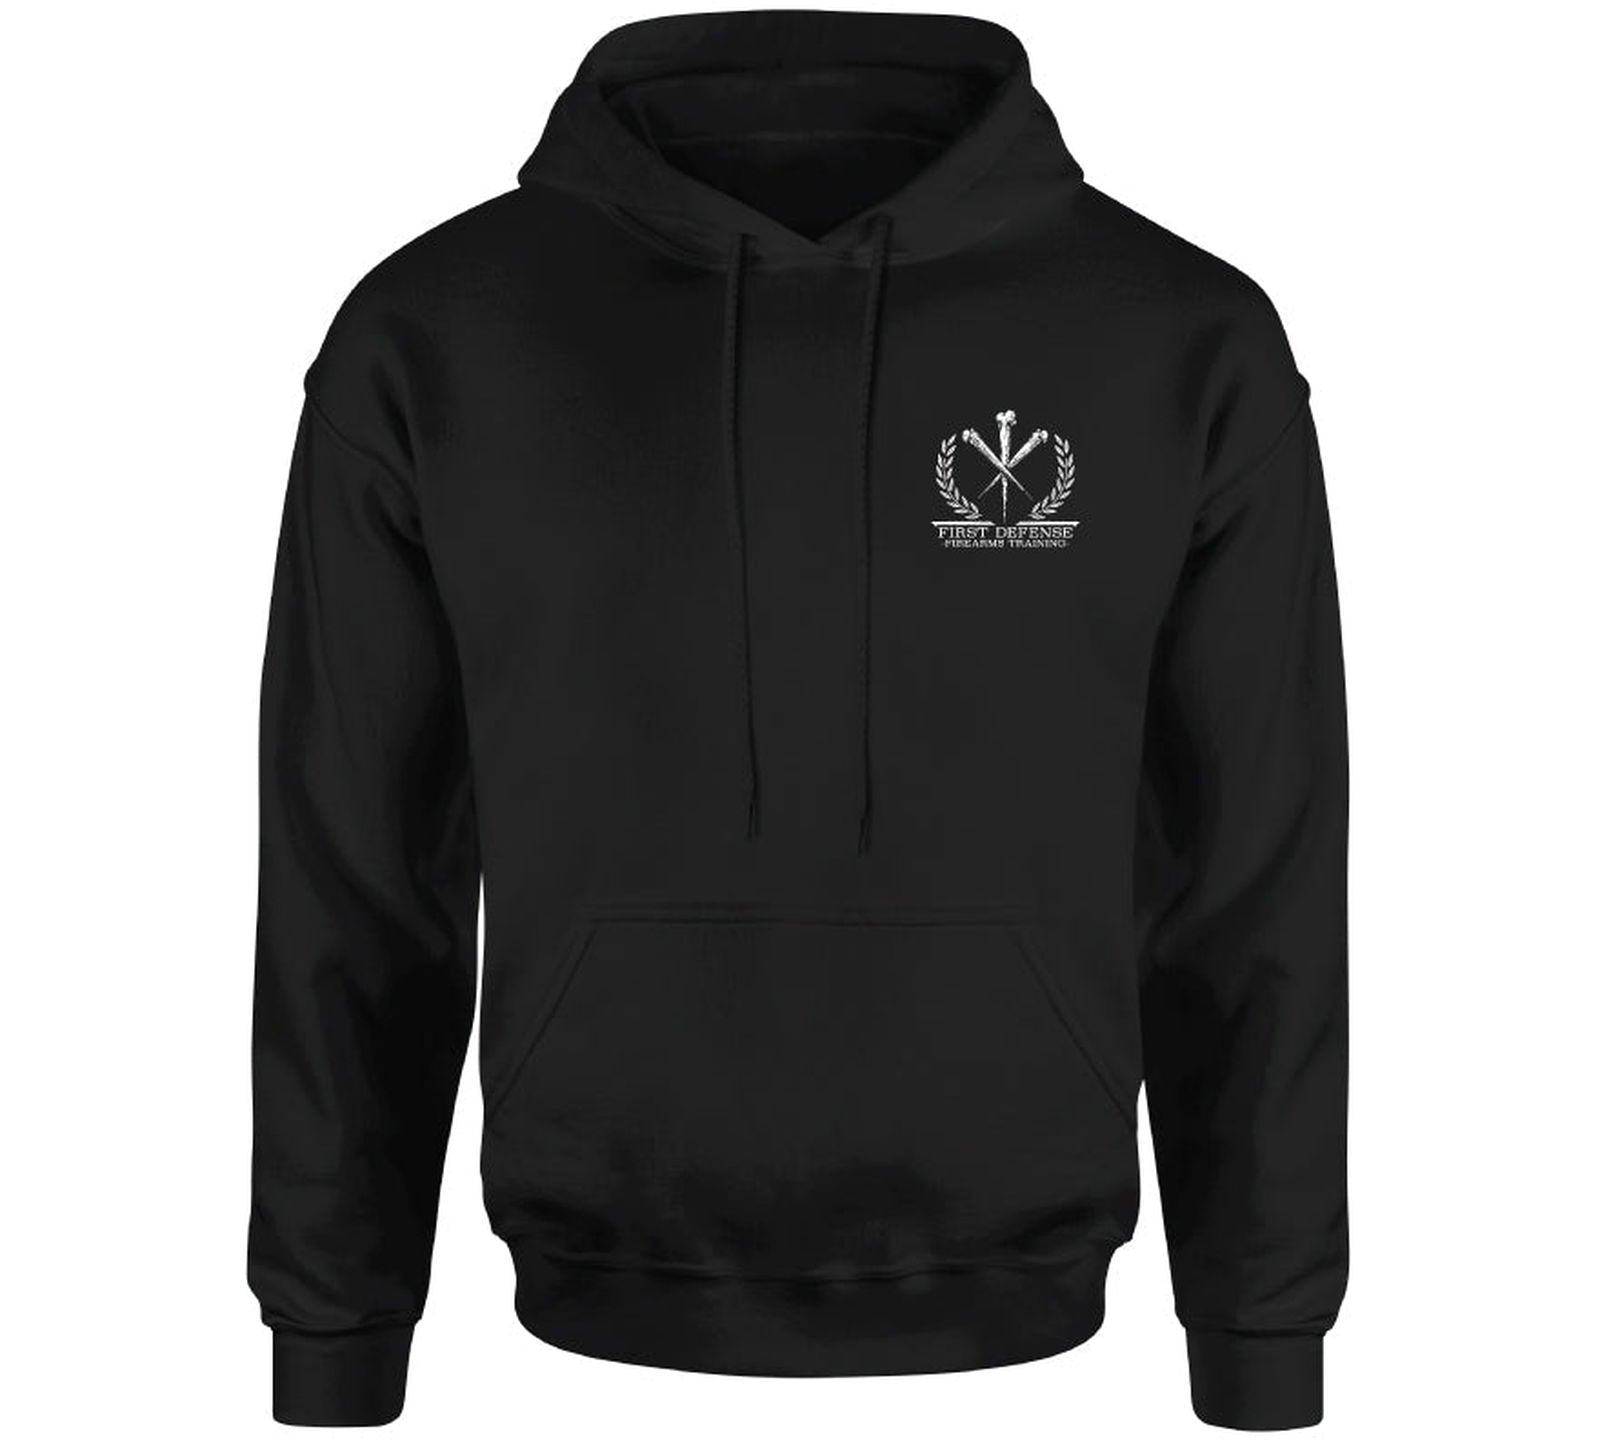 First Defense Hood - Howitzer Clothing